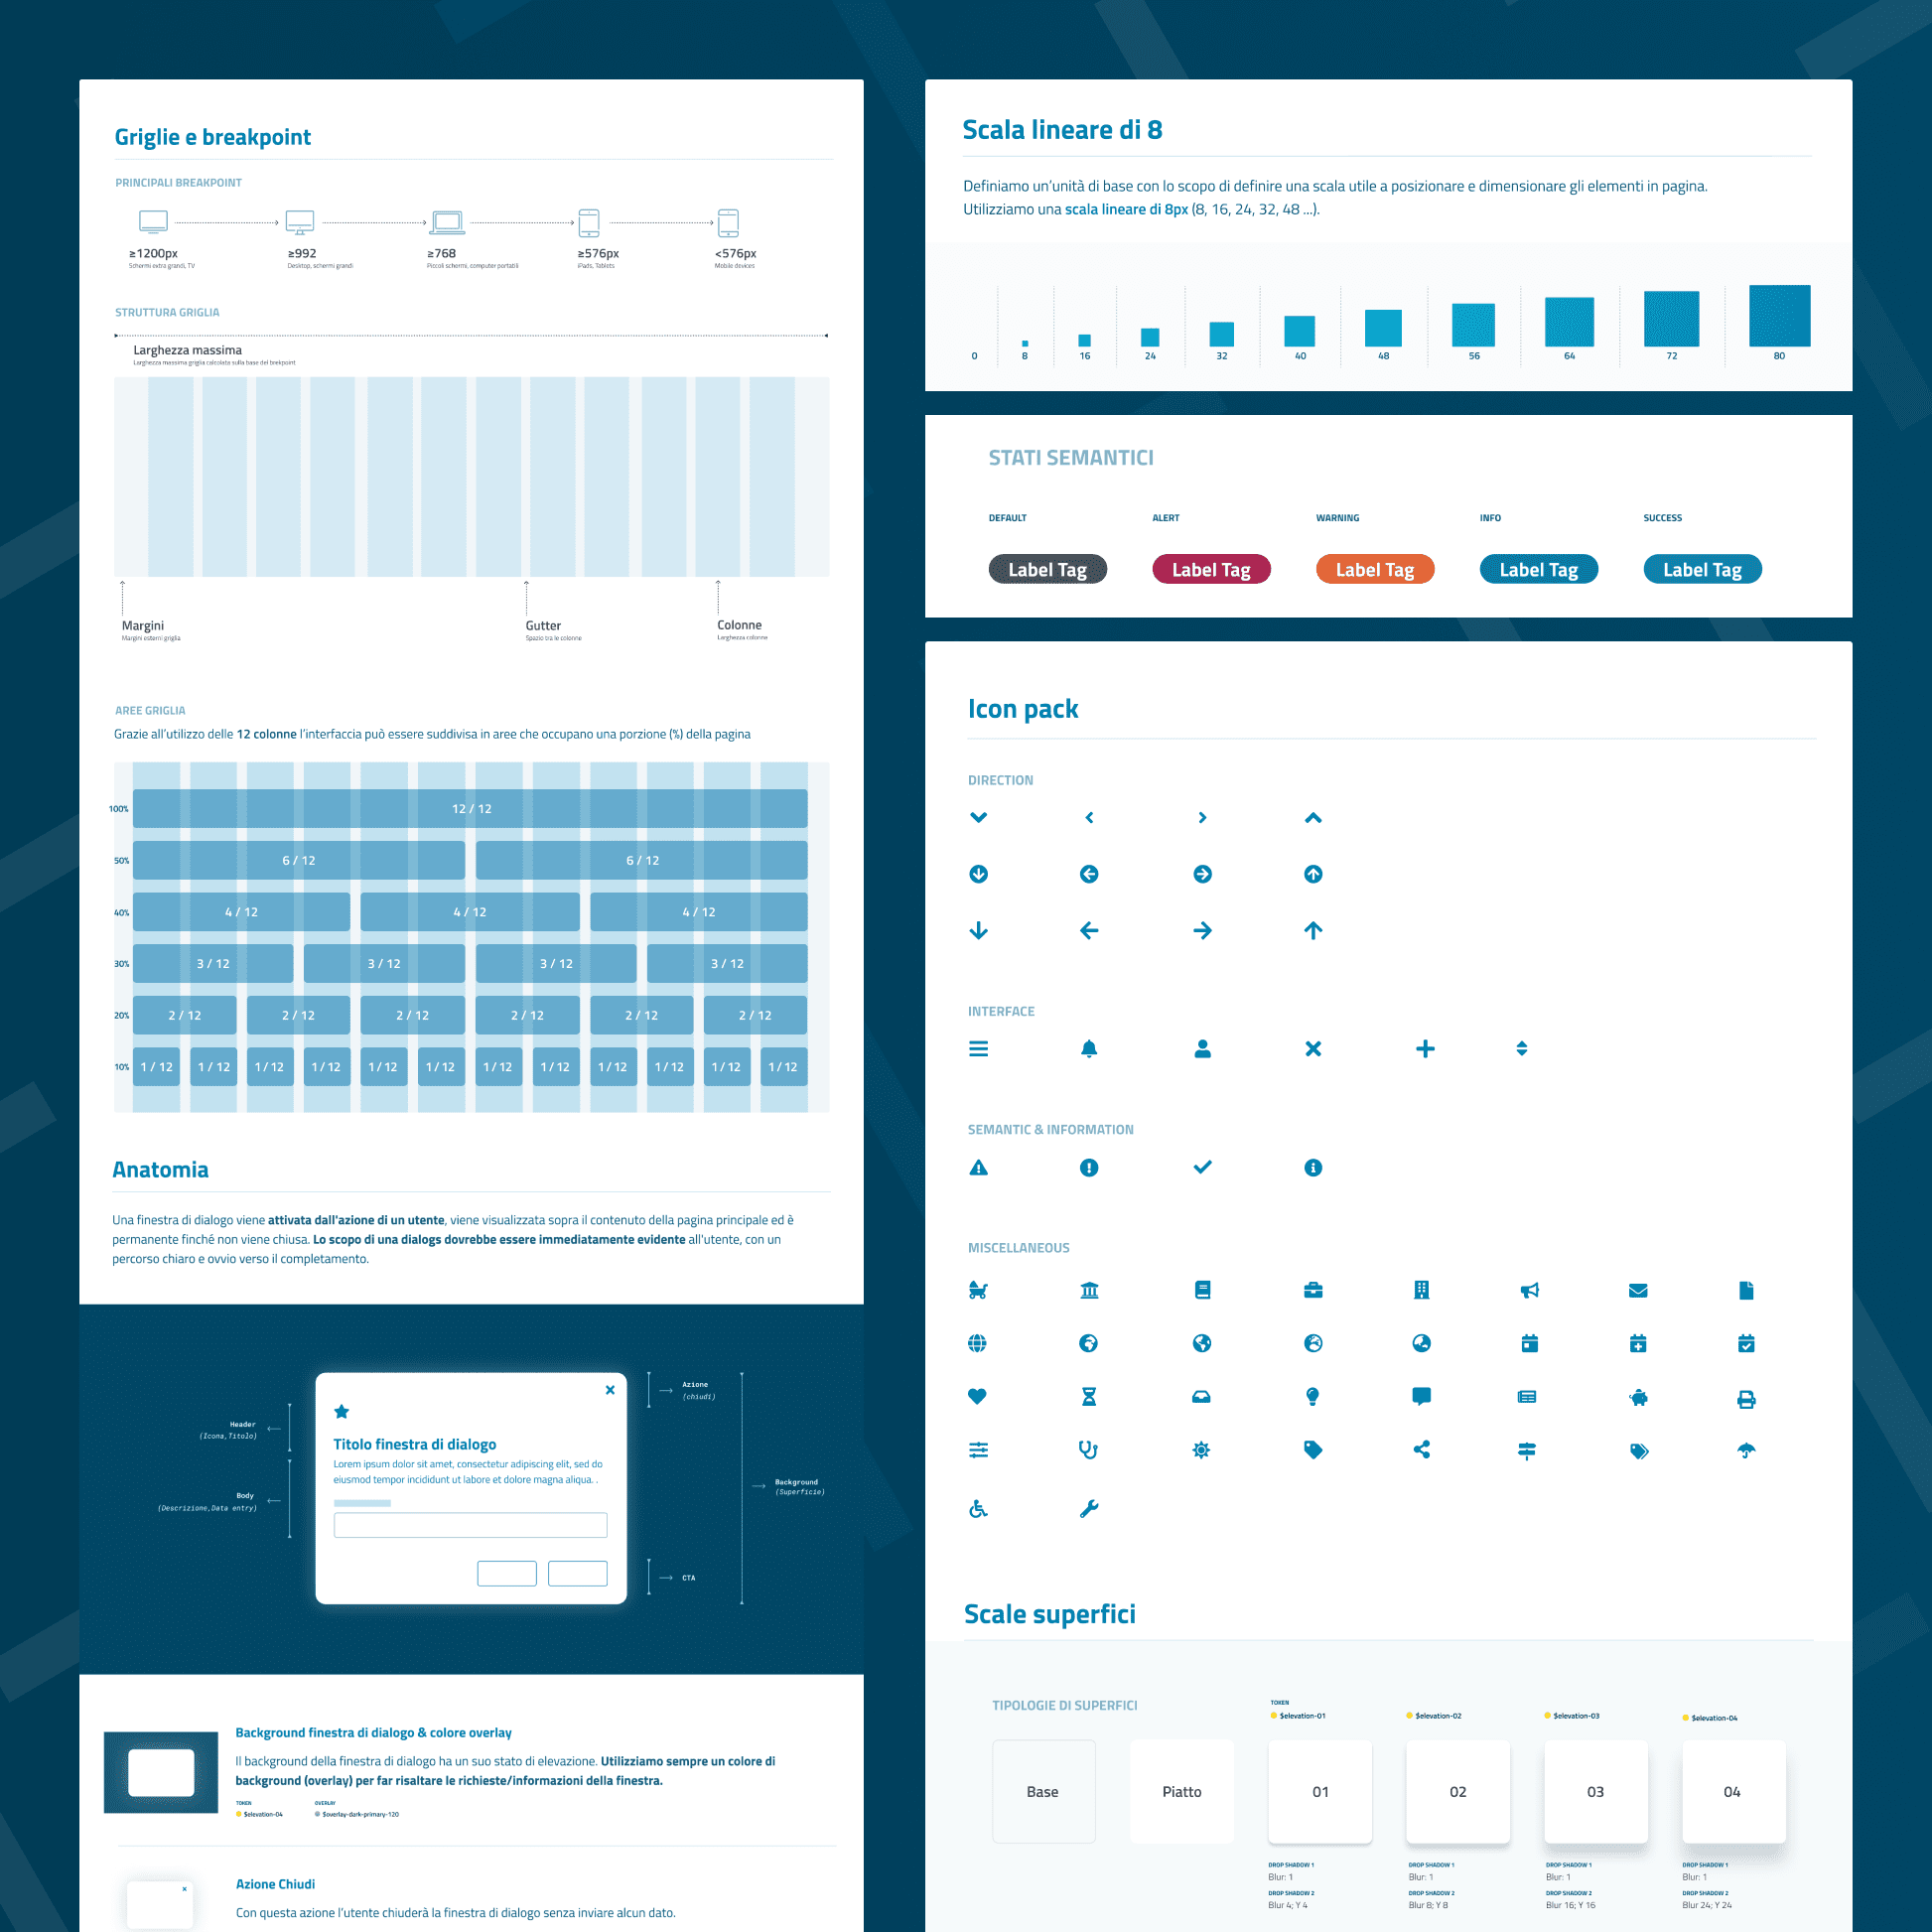 Details of some design guidelines of Sirio, design system of INPS